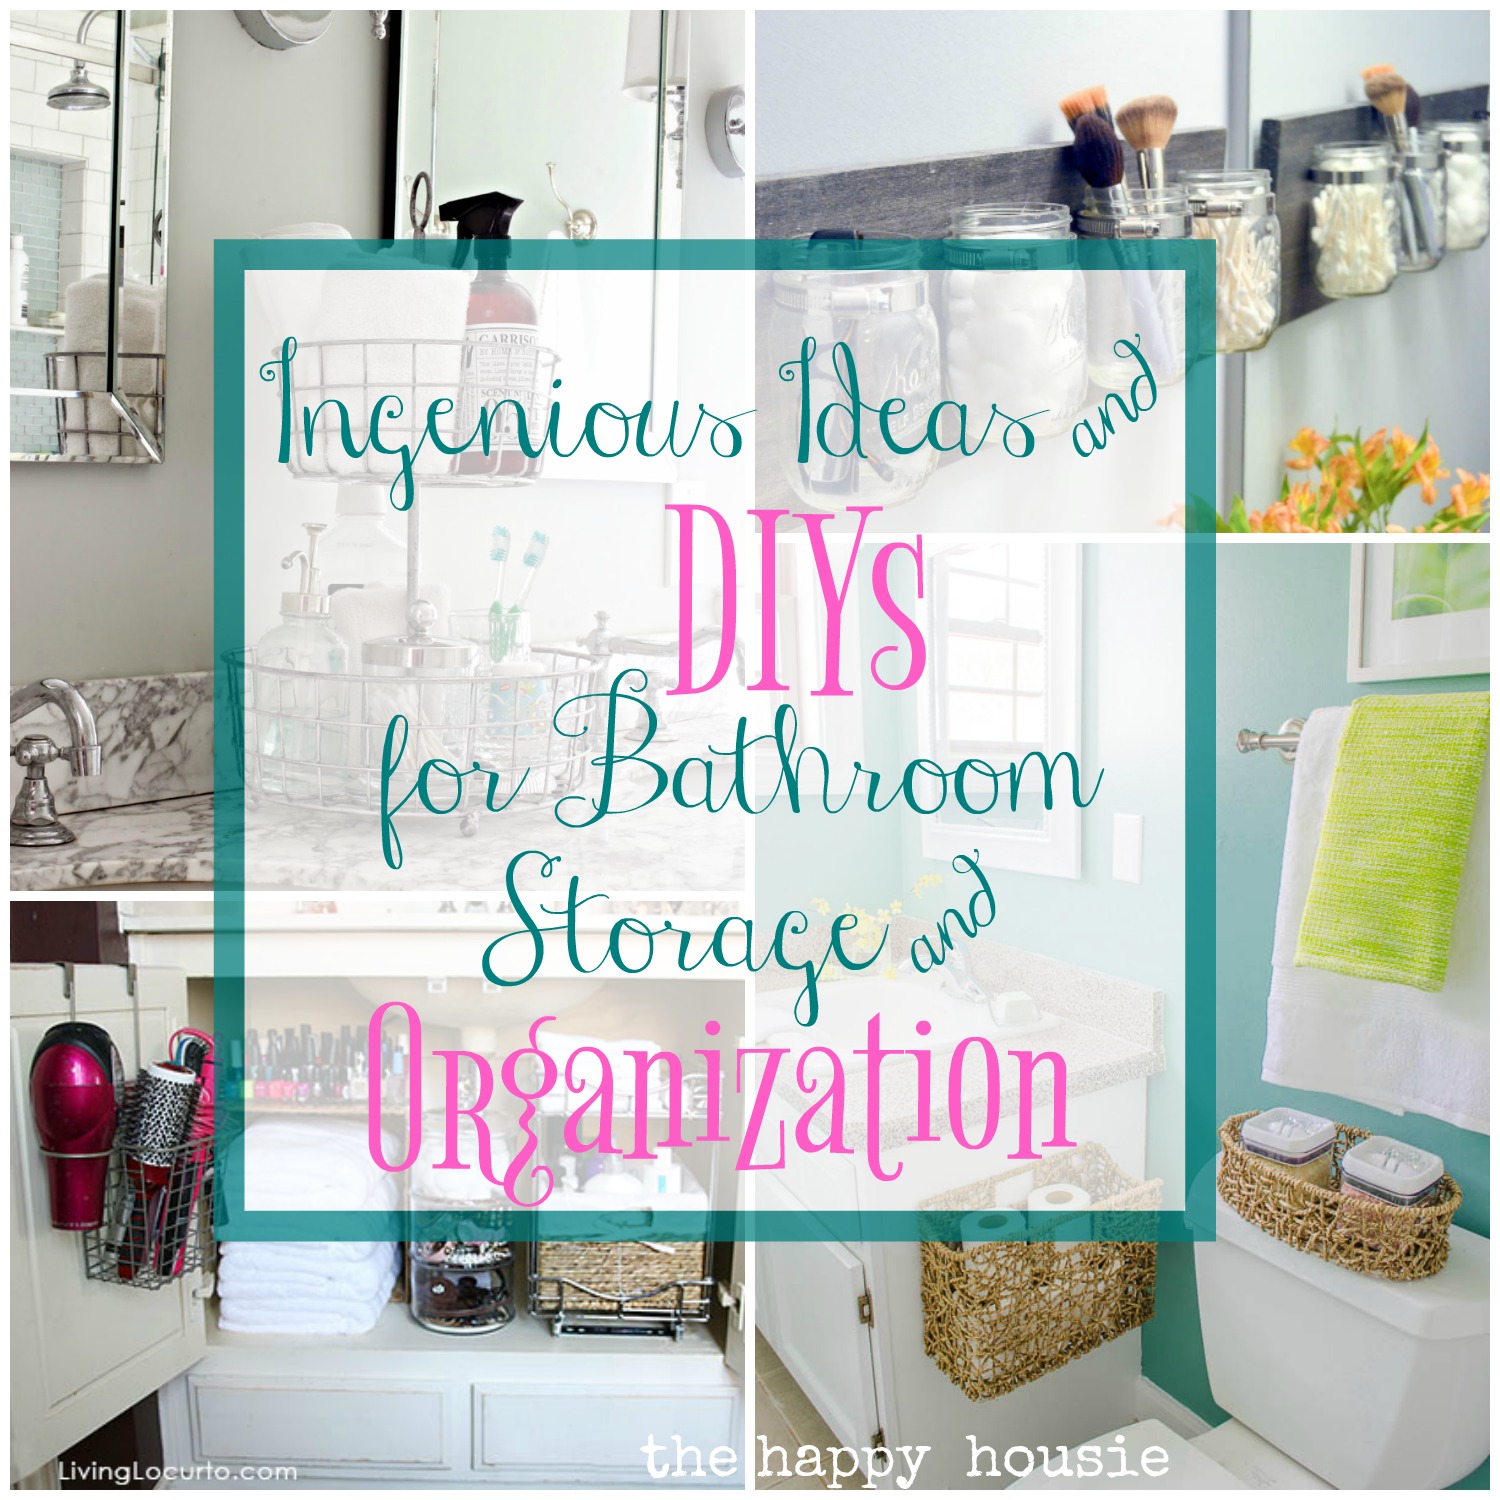 The ingenious ideas and DIYs for bathroom storage and organization poster.